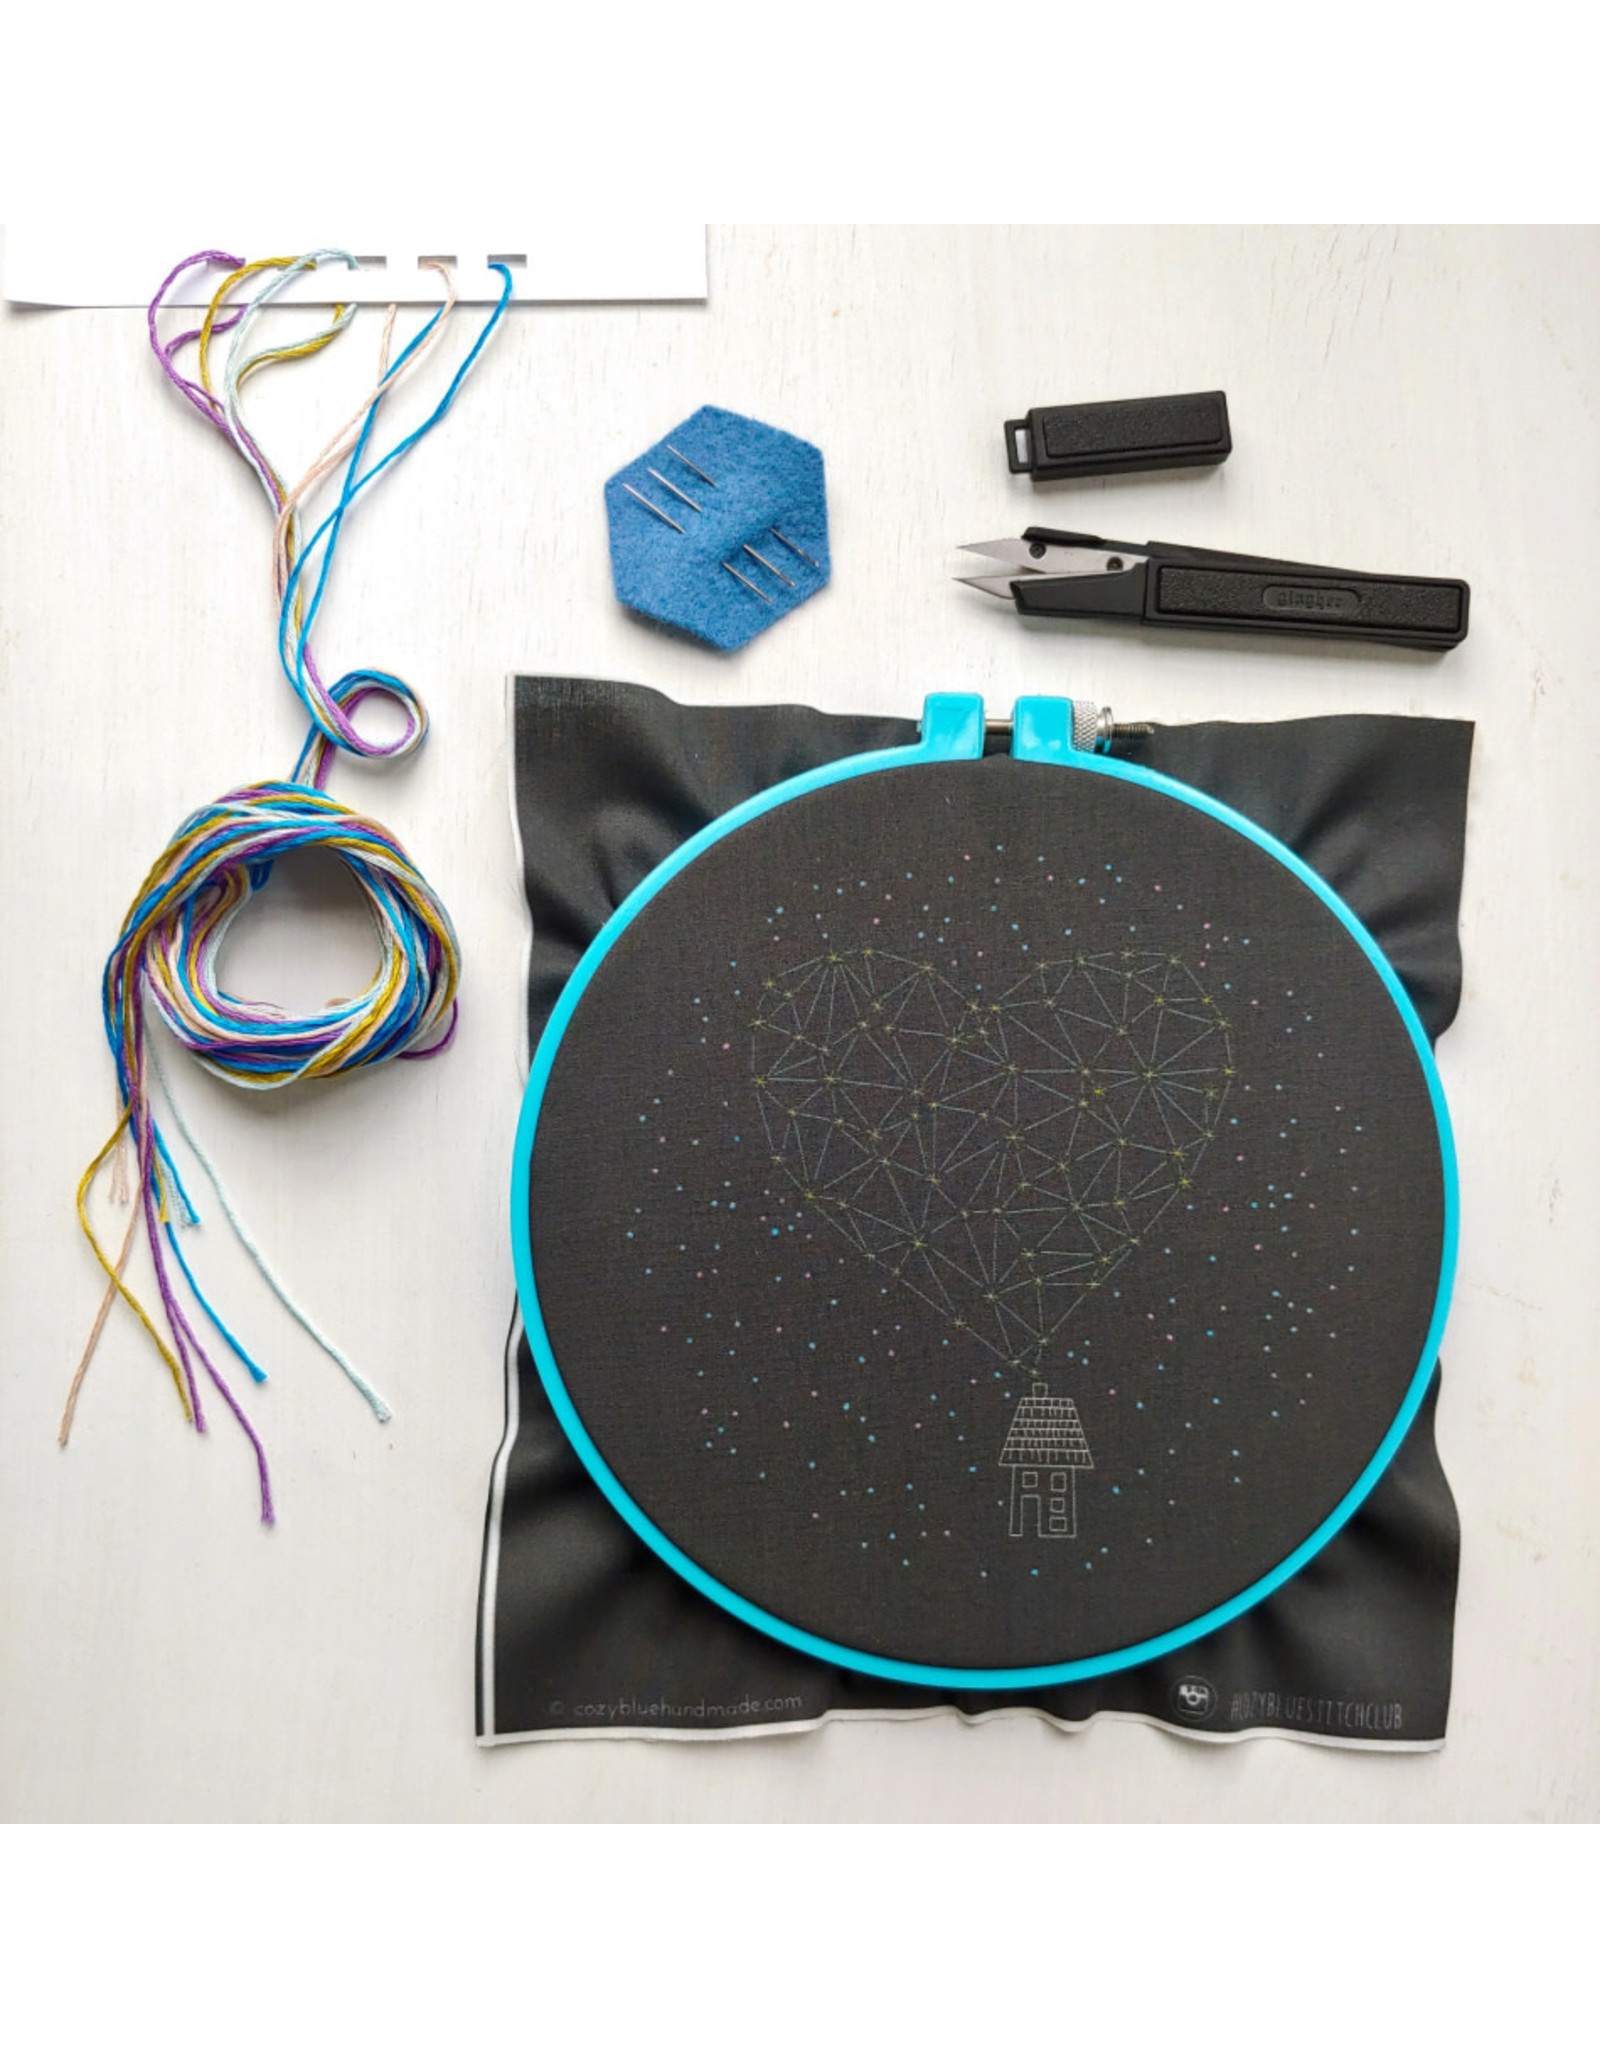 cozyblue Stargazing Embroidery Kit from cozyblue